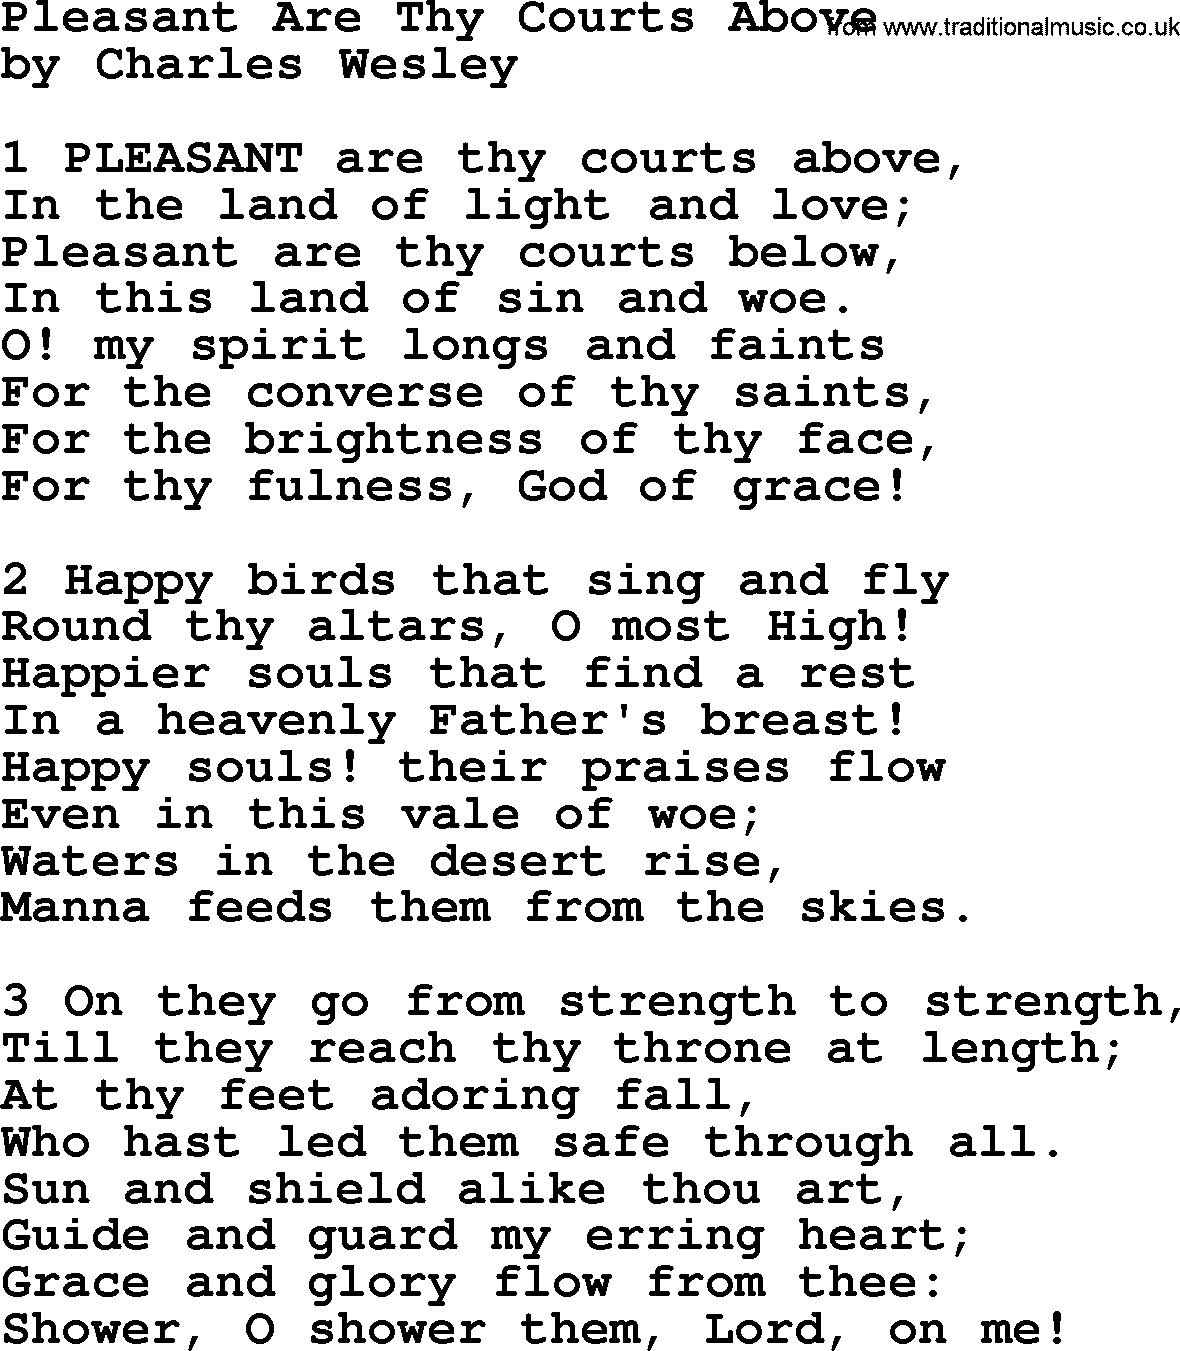 Charles Wesley hymn: Pleasant Are Thy Courts Above, lyrics